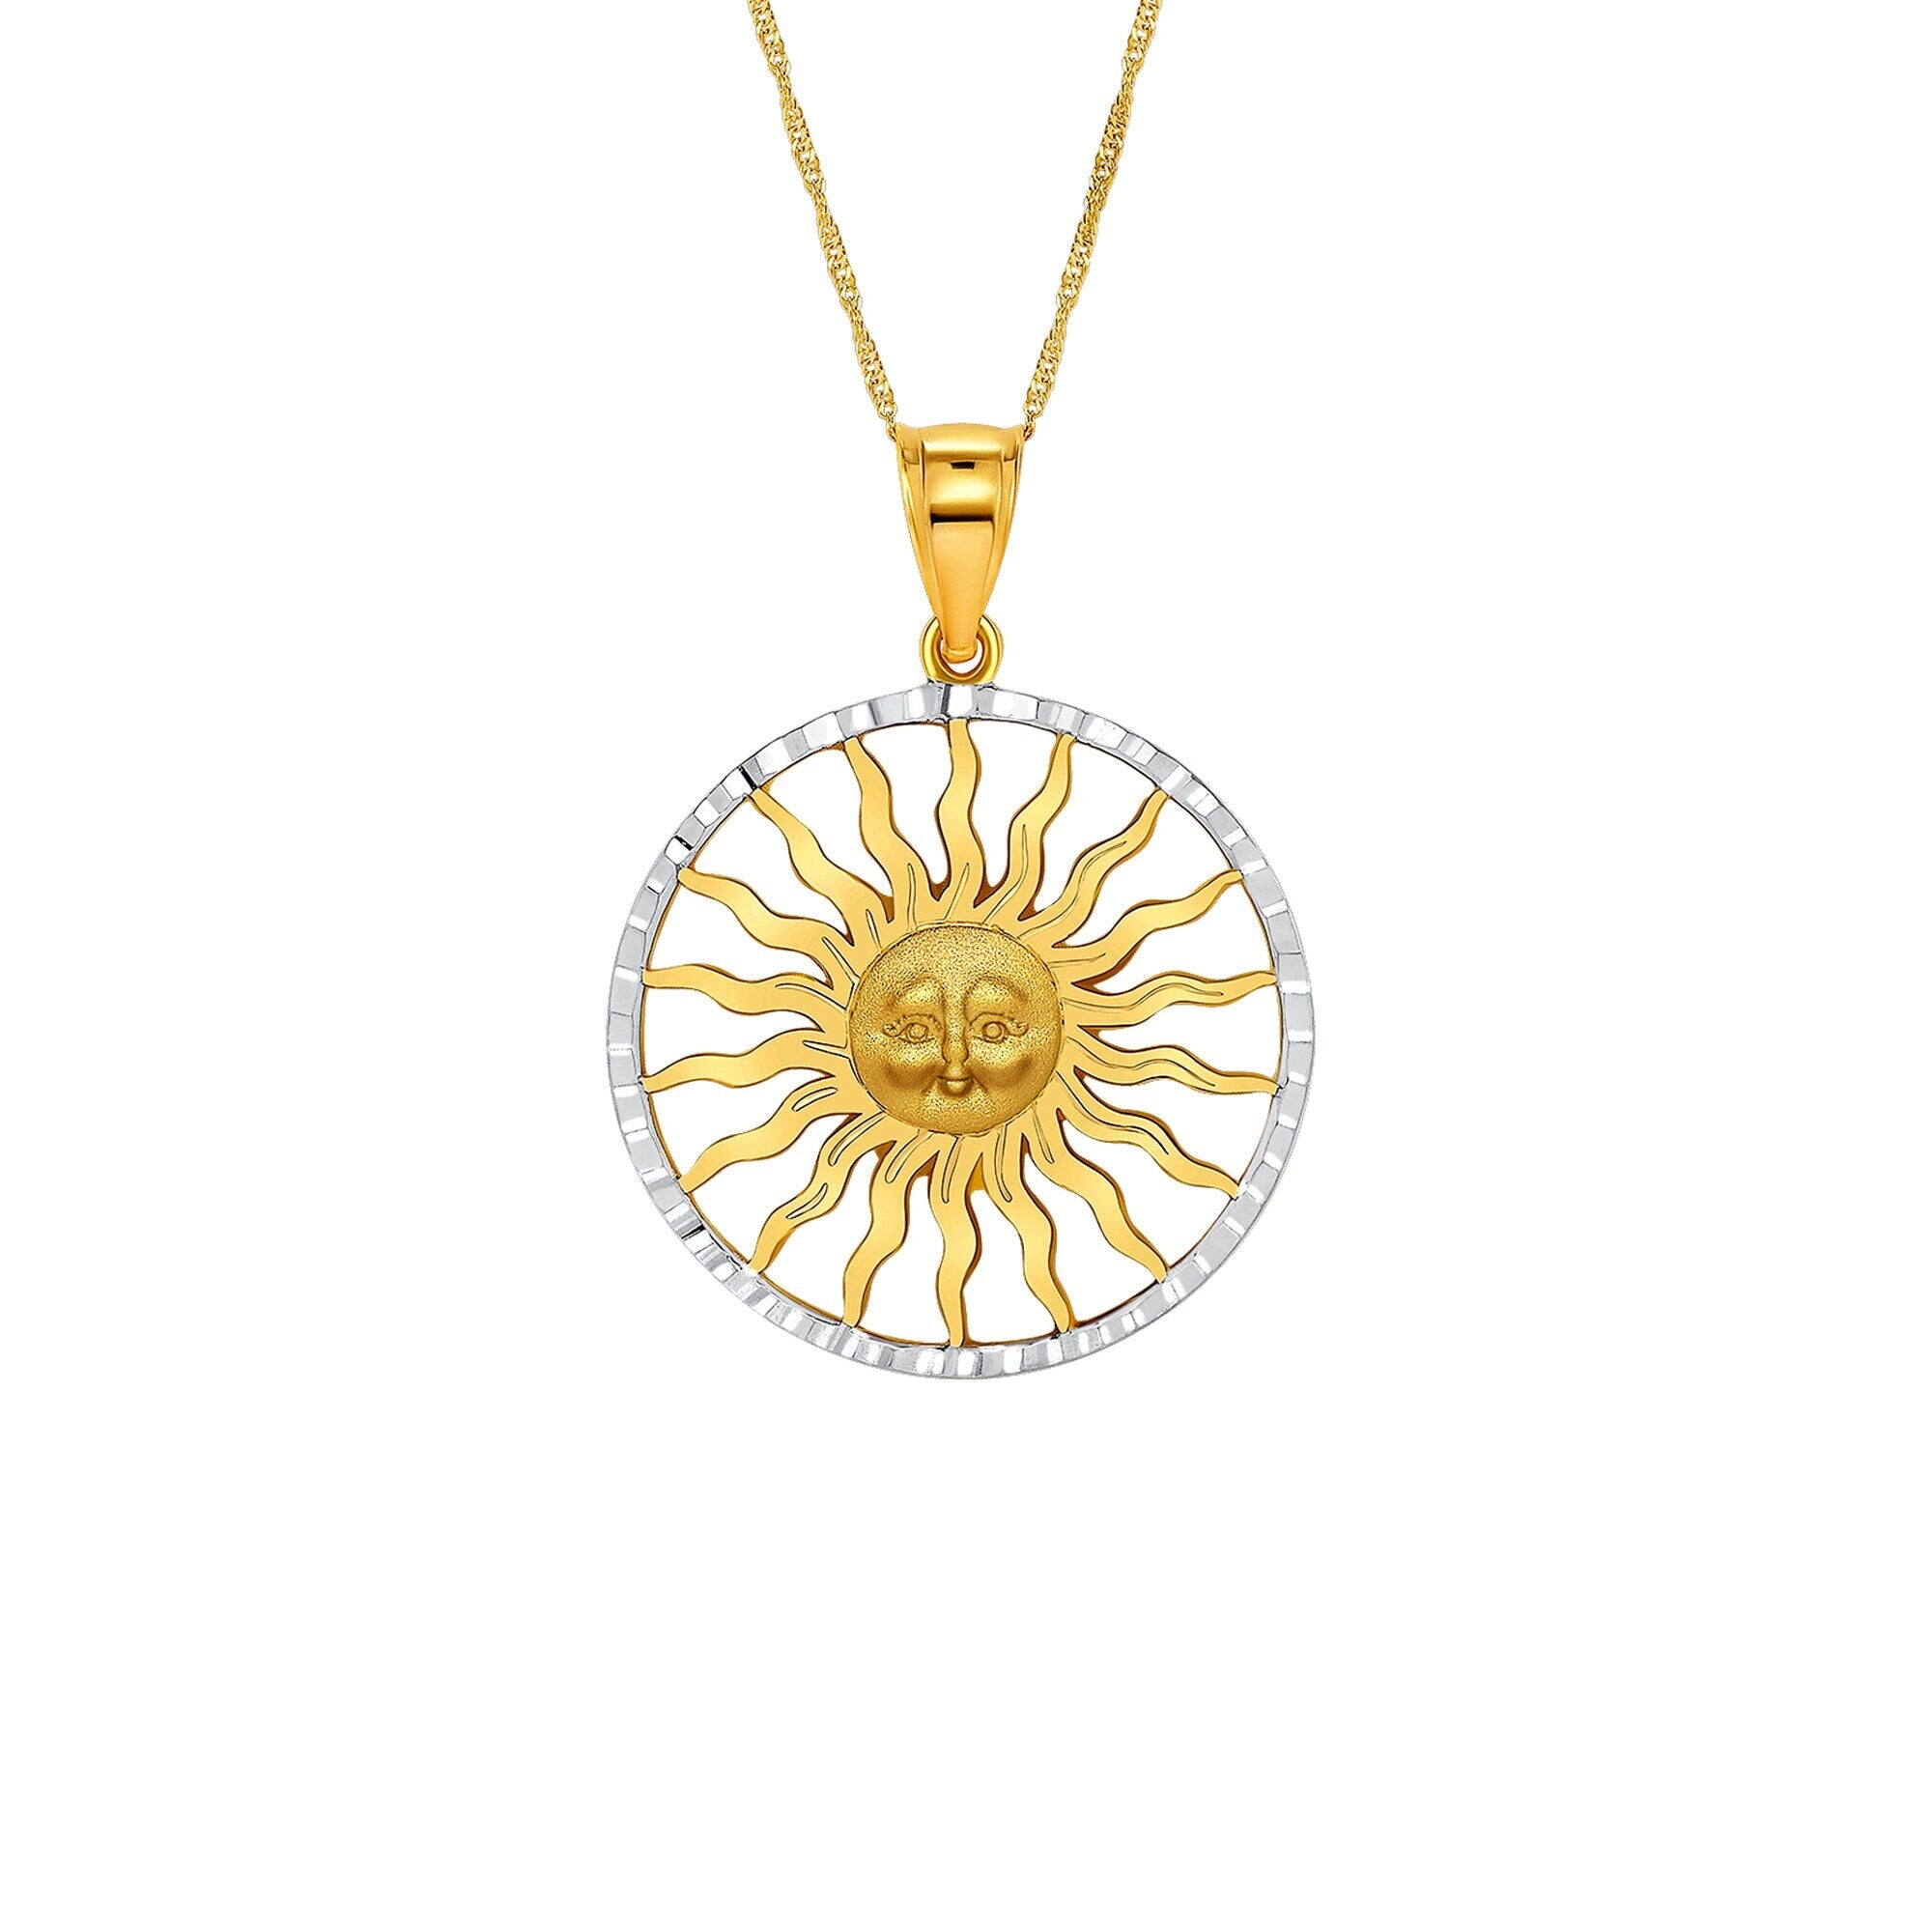 14k solid gold two tone Sun Pendant on 18" solid gold chain